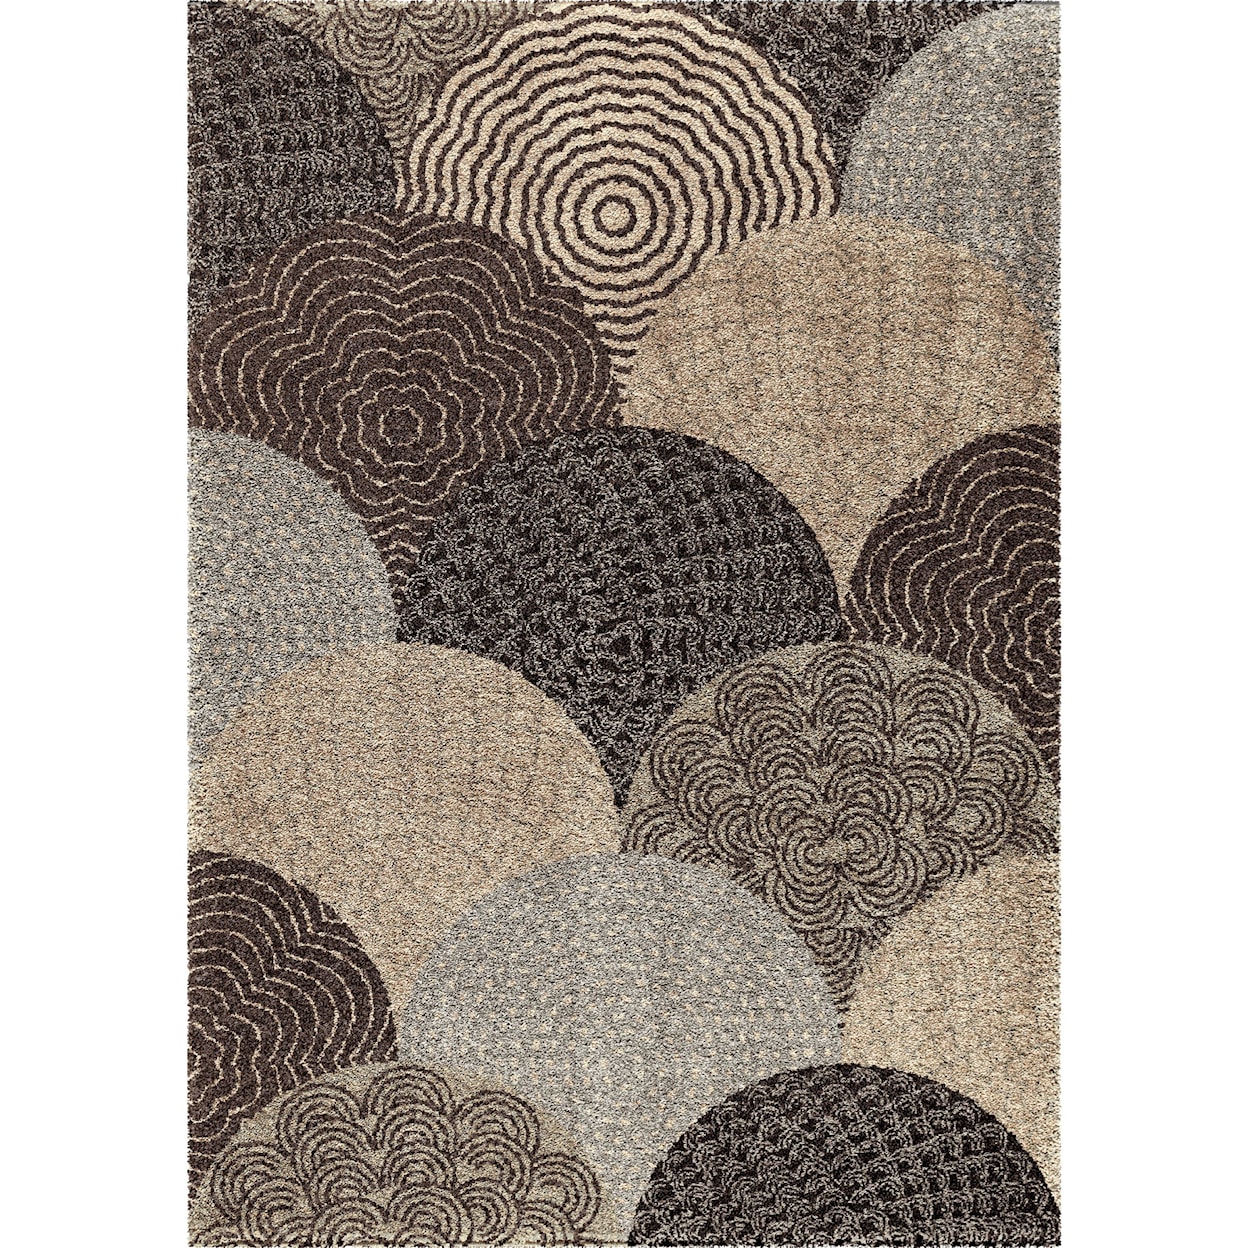 Orian Rugs Wild Weave Oystershell Seal Black 6'7" x 9'8" Rug